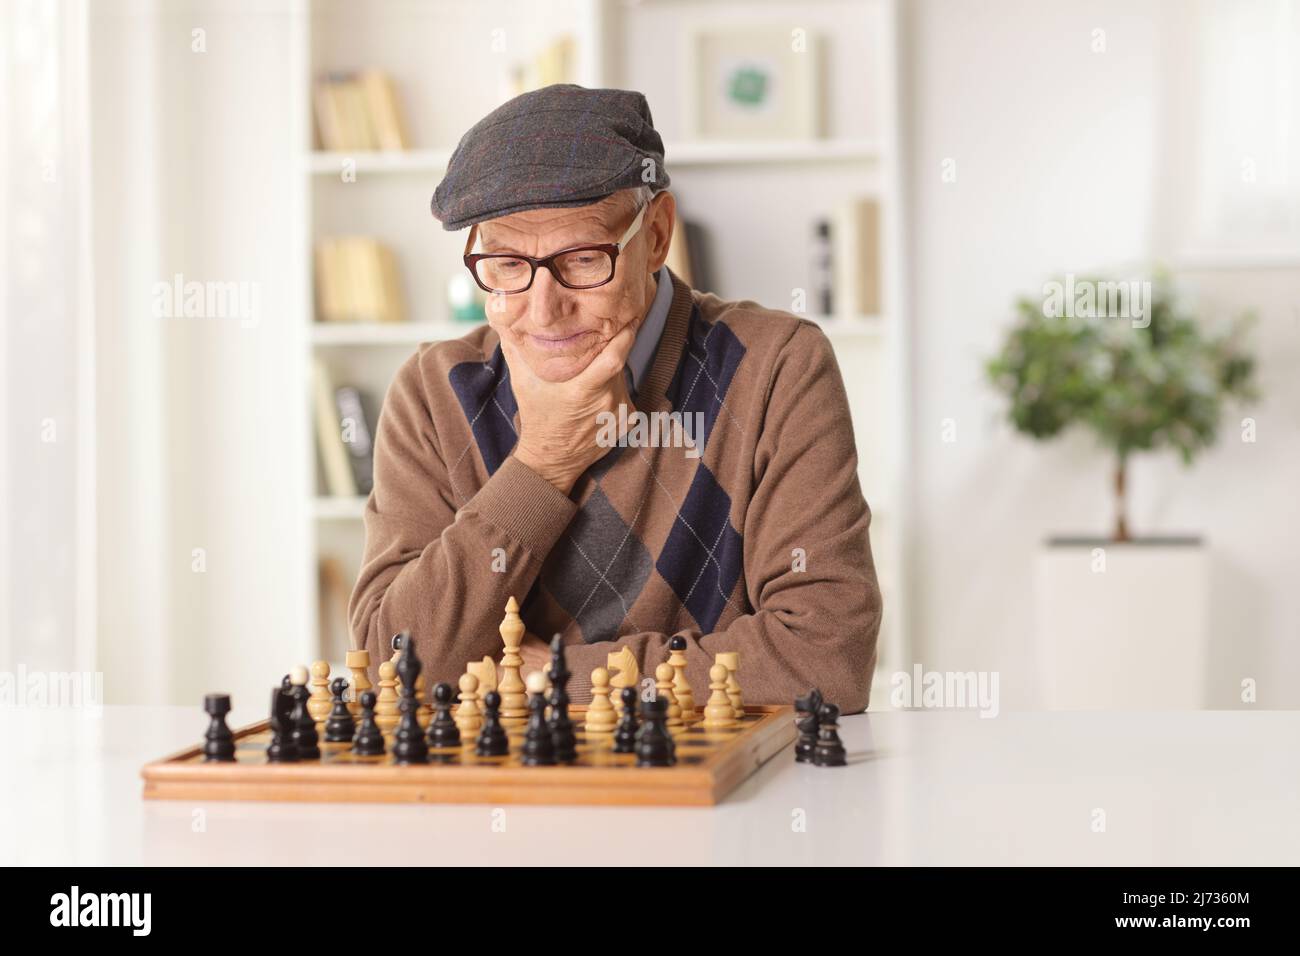 Elderly man playing chess alone at a table at home Stock Photo